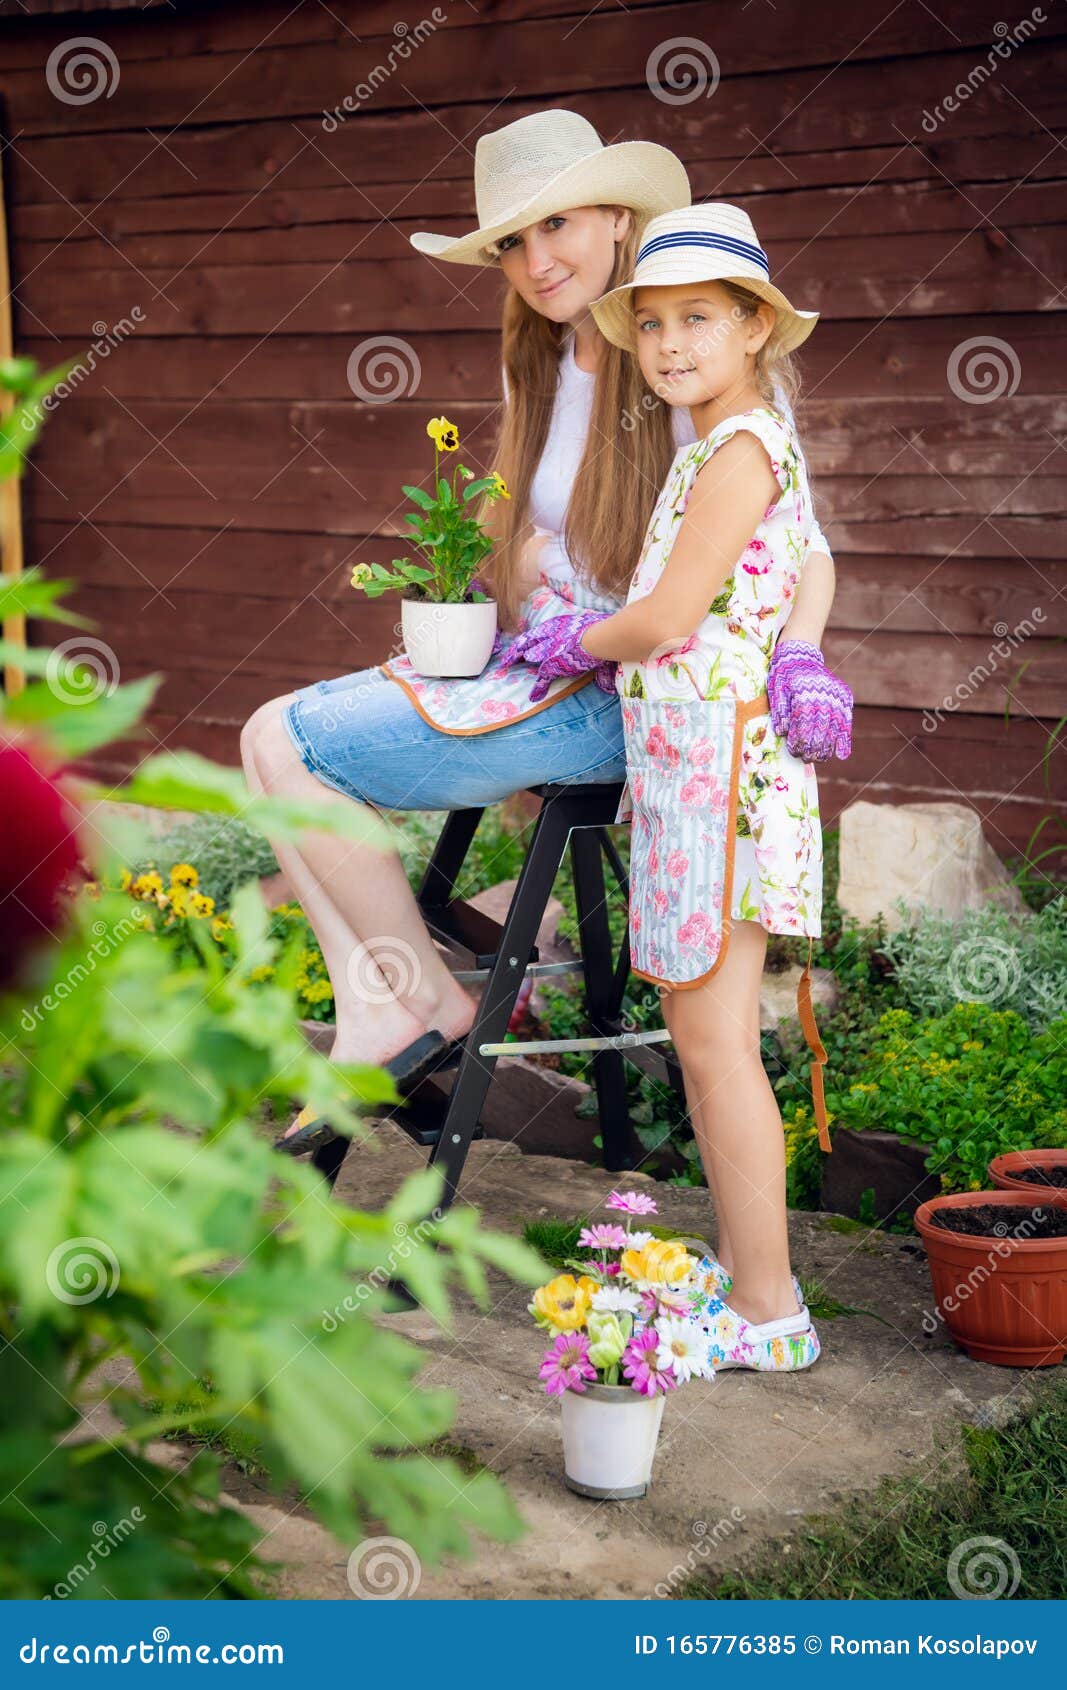 Woman And Girl Mother And Daughter Gardening Together Planting Flowers In The Garden Looking 